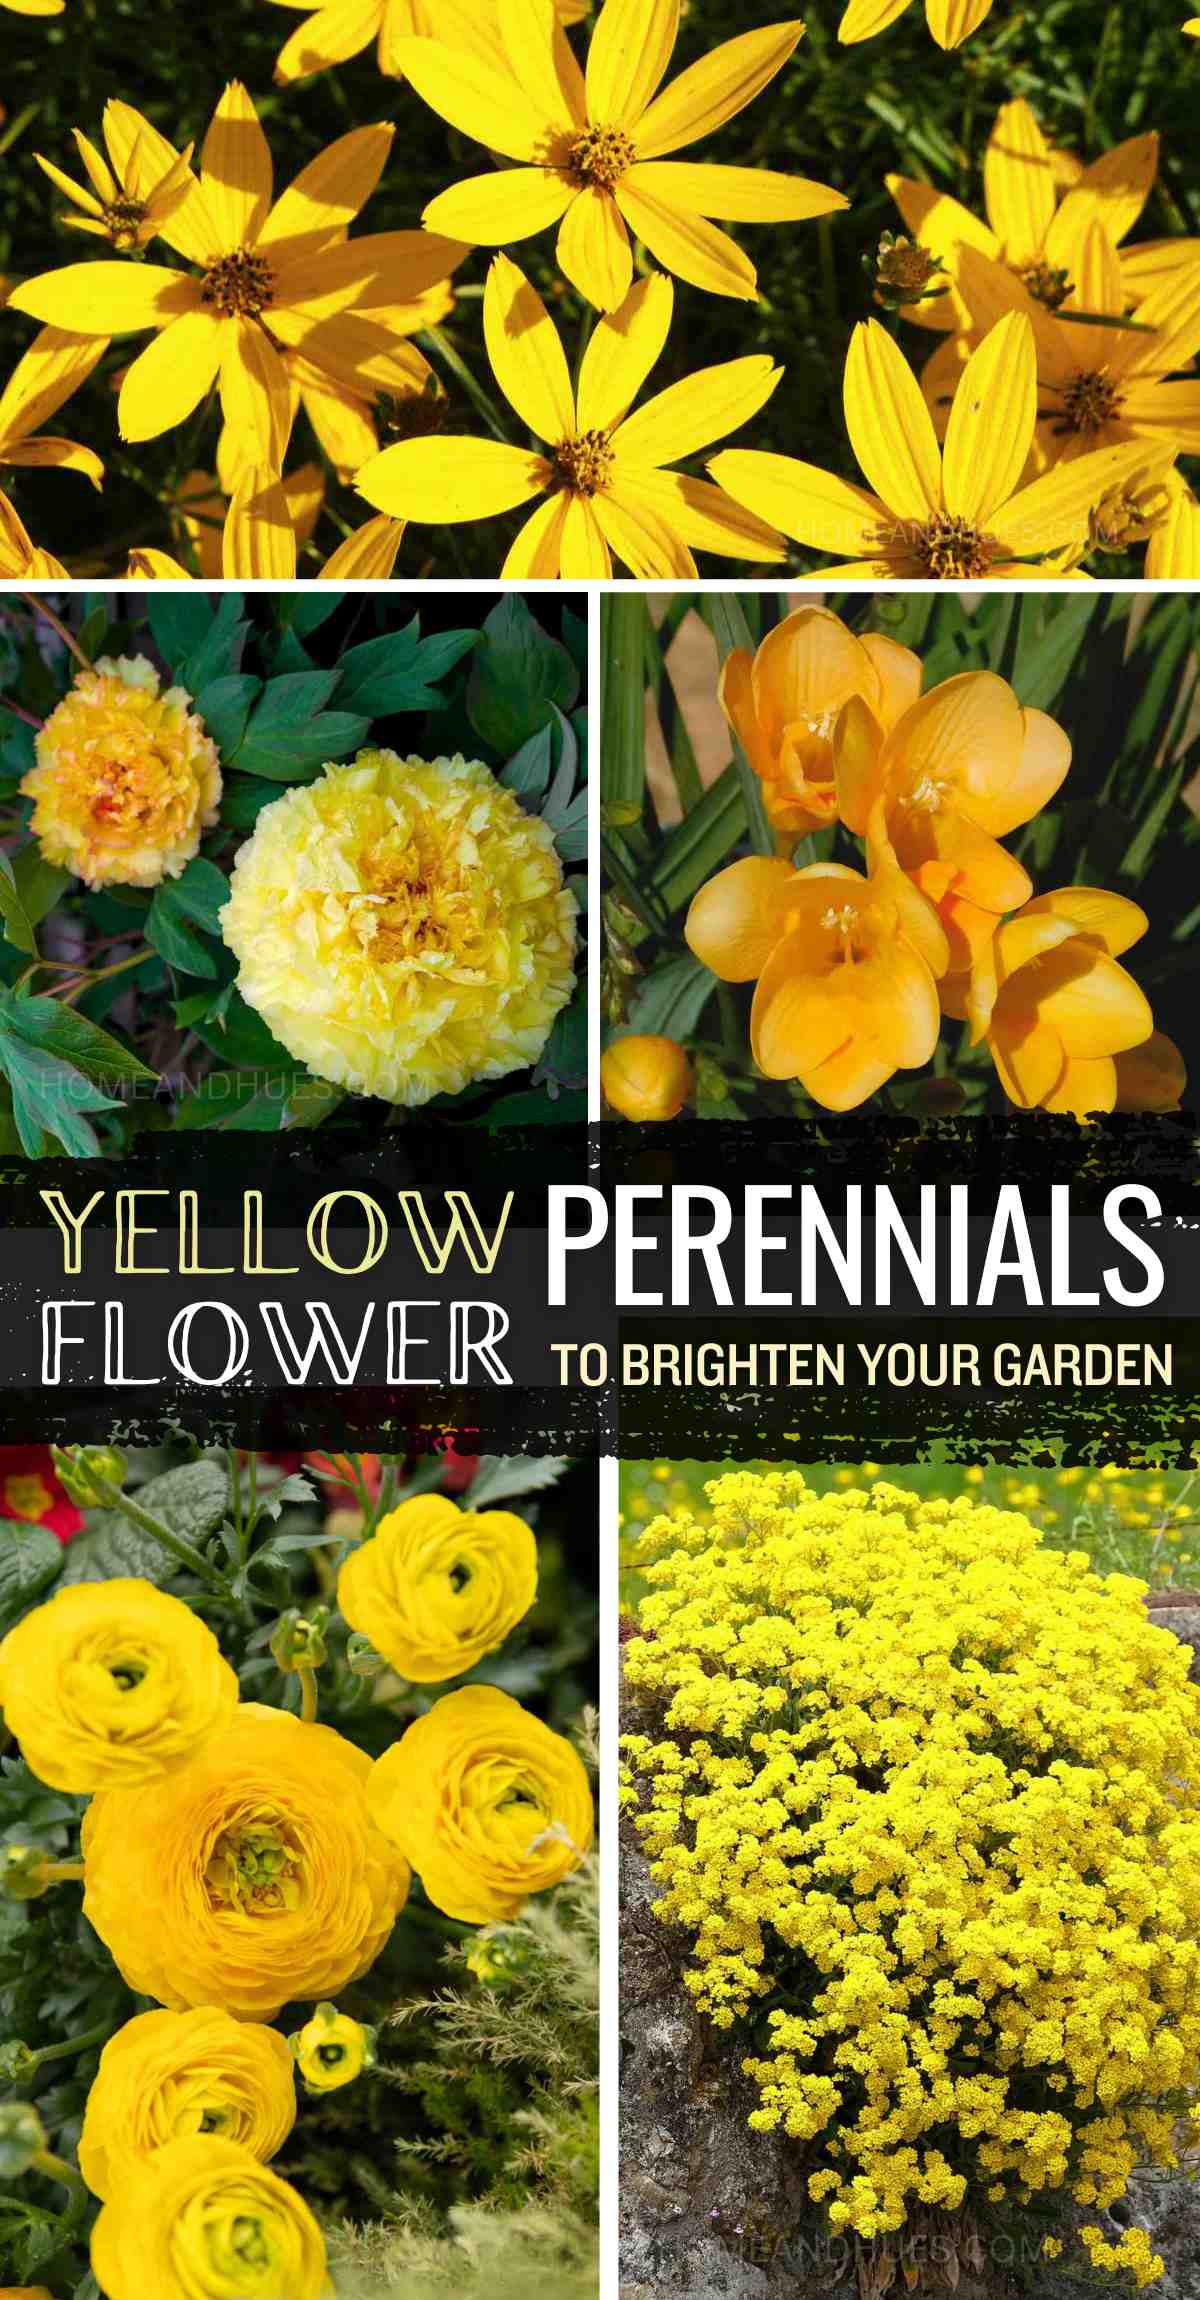 Stunning Perennials With Yellow Flowers. Perfect for your Front Yard, or garden , these yellow perennial flowers come in both tall and small varieties, adding a cheerful touch to any space. These plants bloom beautifully in the summer, creating a vibrant view. Explore the best options to make your garden stand out all season long.
